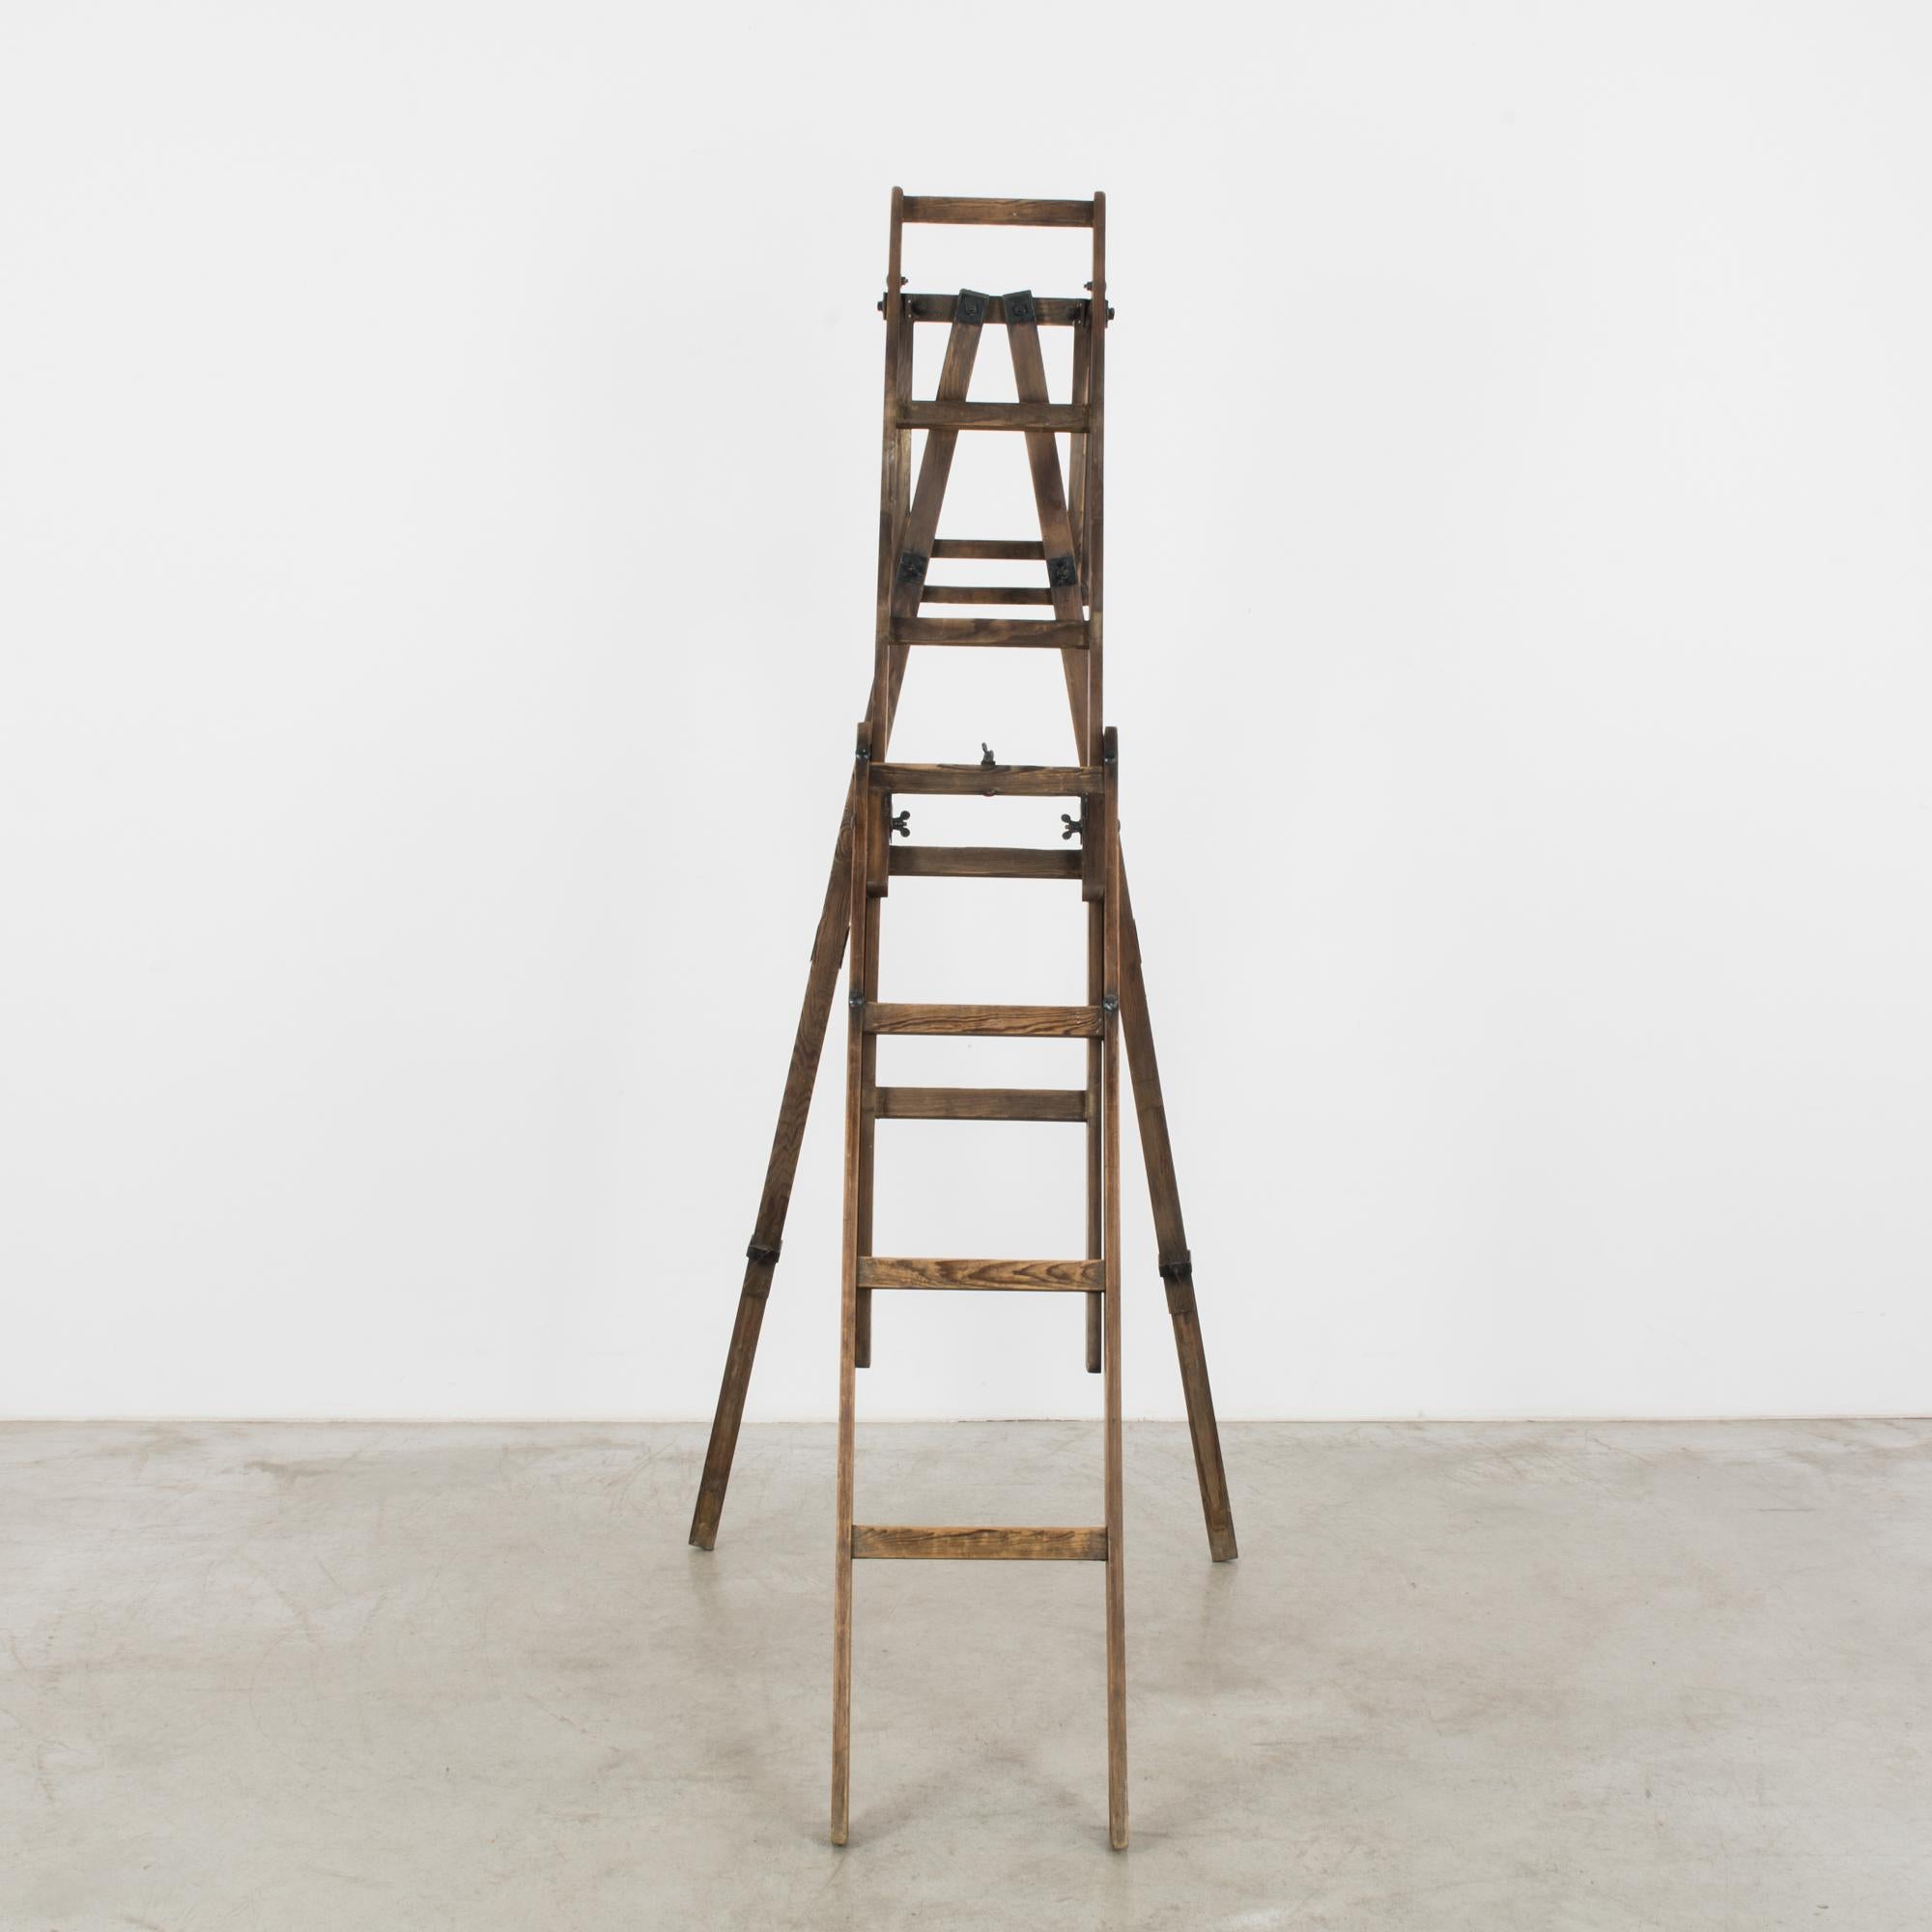 This wooden stepladder was made in France, circa 1920, and can be used in various ways, from displaying objects to sprucing up an interior space with a rustic accent piece. It is supported by two posts, which form a triangle on the opposite end. The